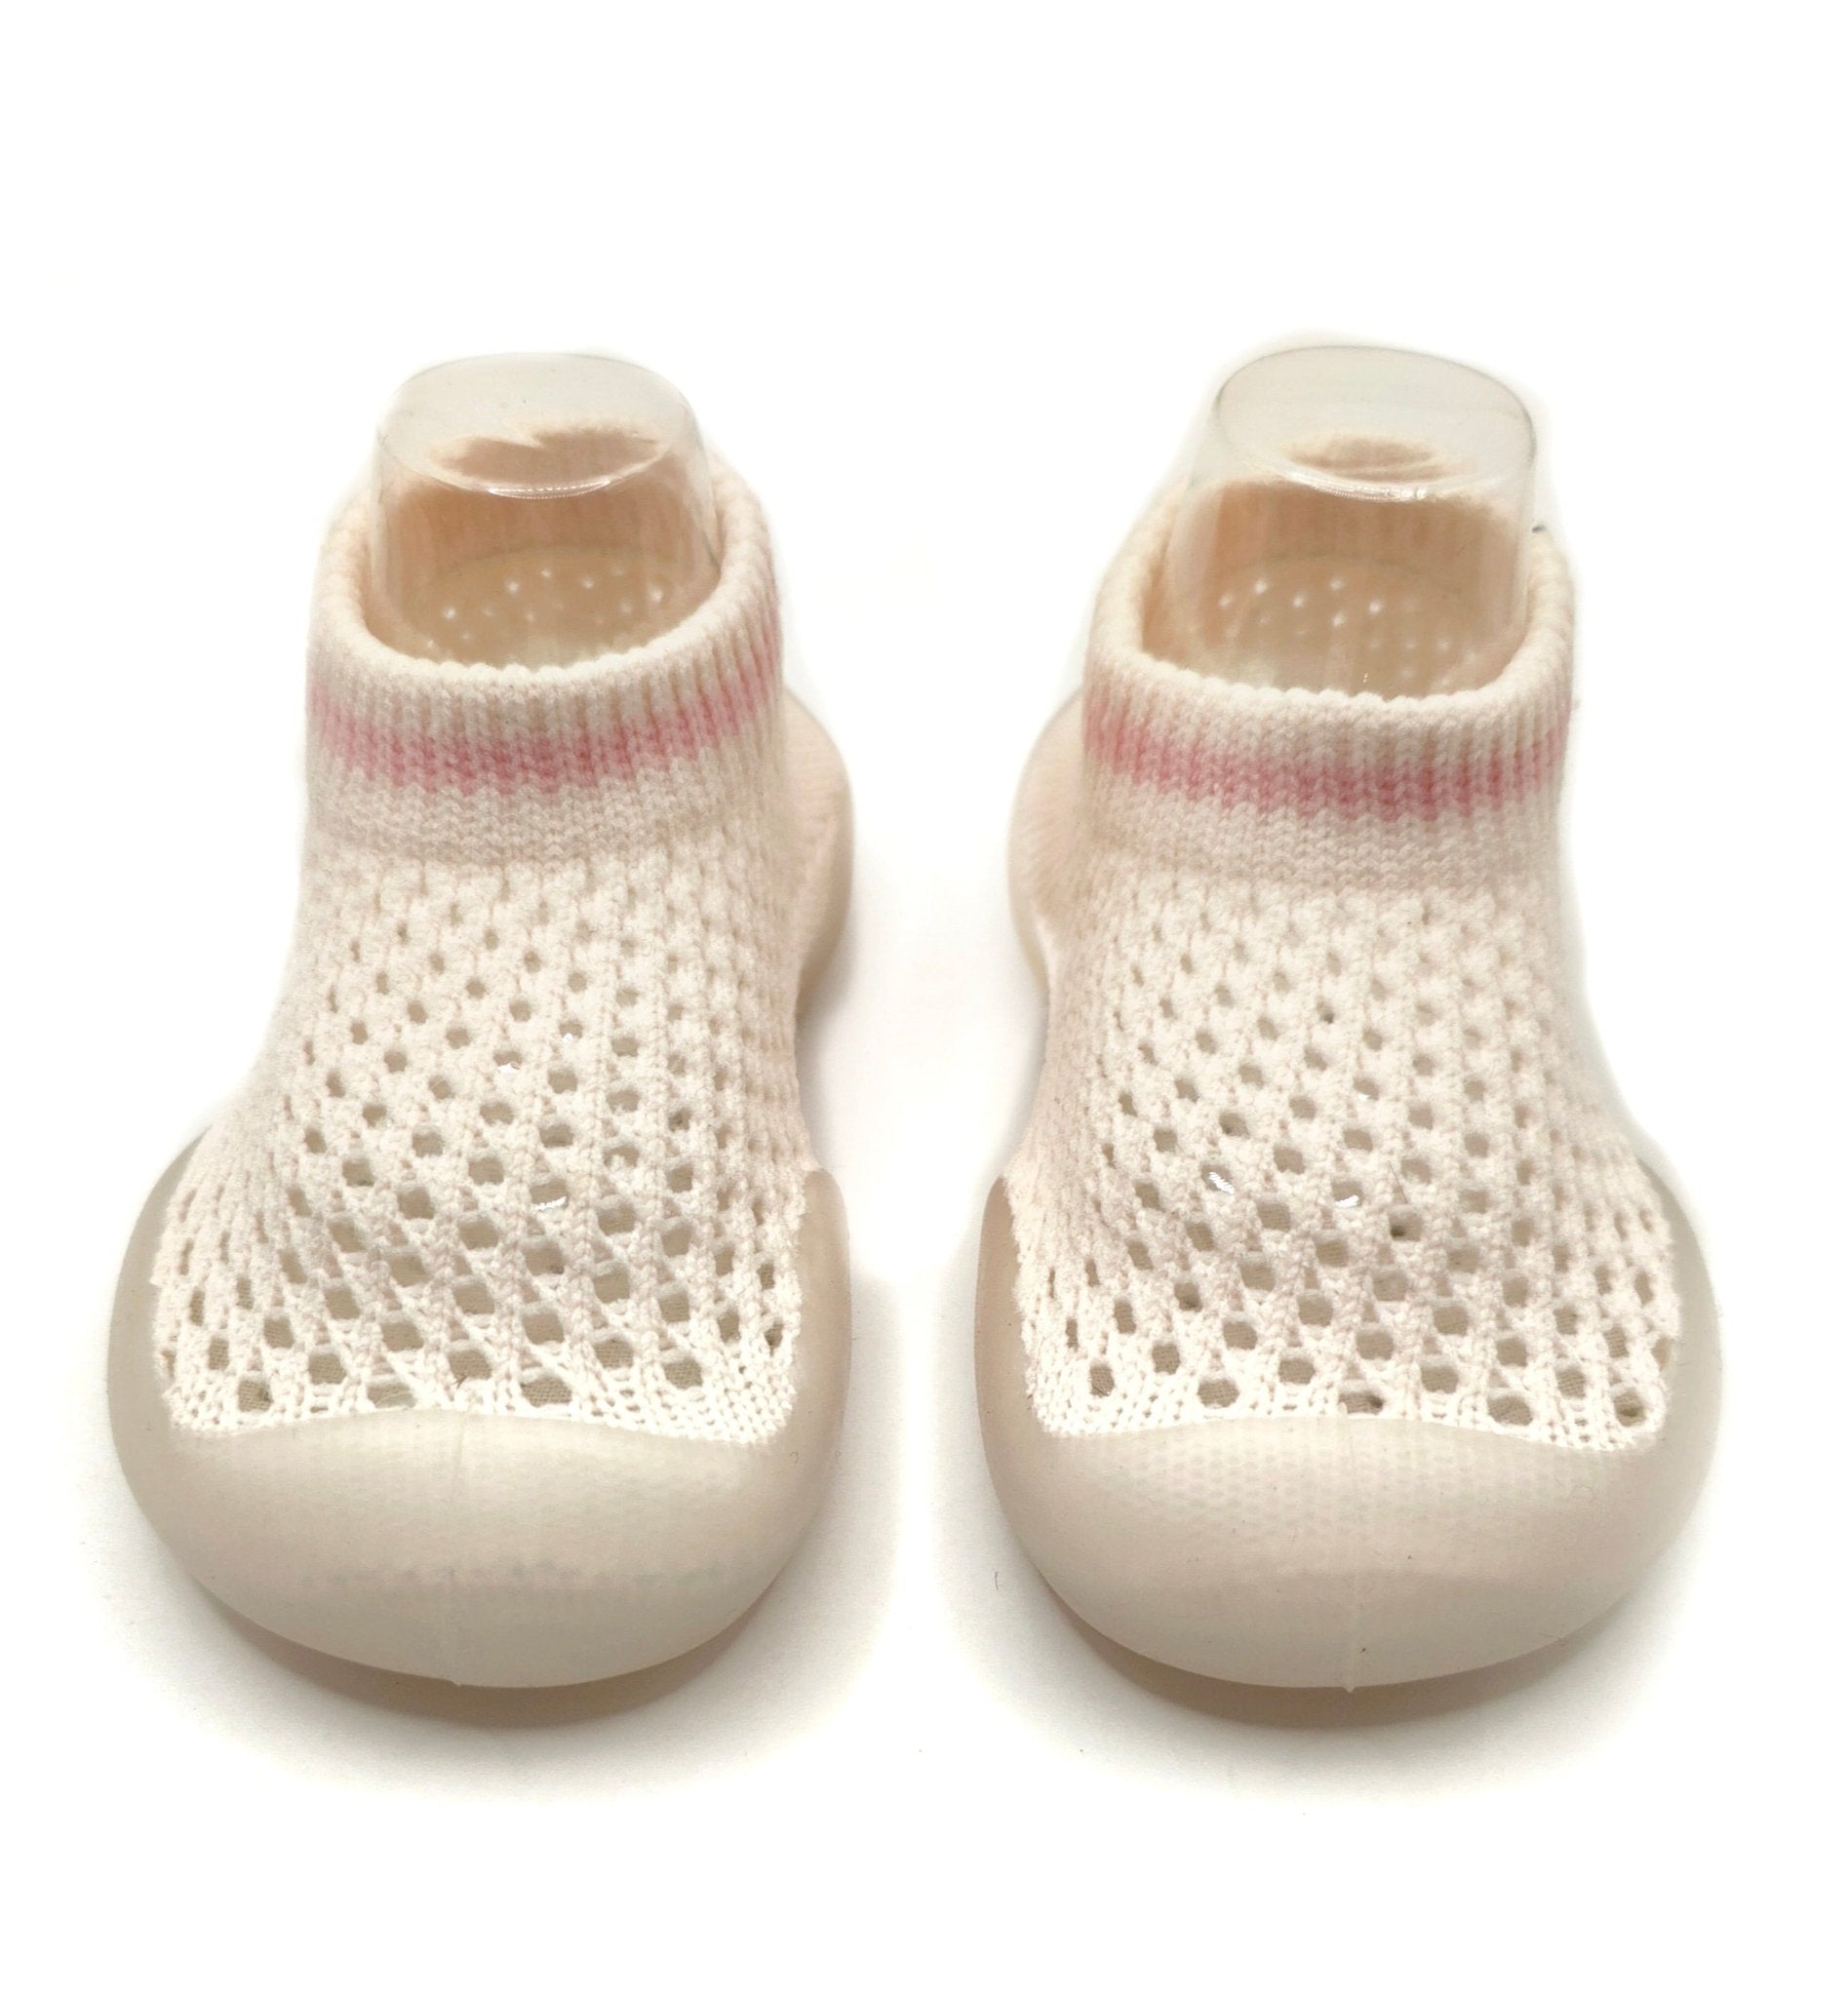 Kool Summer by Bearba-Sock Shoes for Babies Sizes-XS,S,M- Flexible Soles, Breathable, Lightweight, Machine Washable-Pink - Bearba